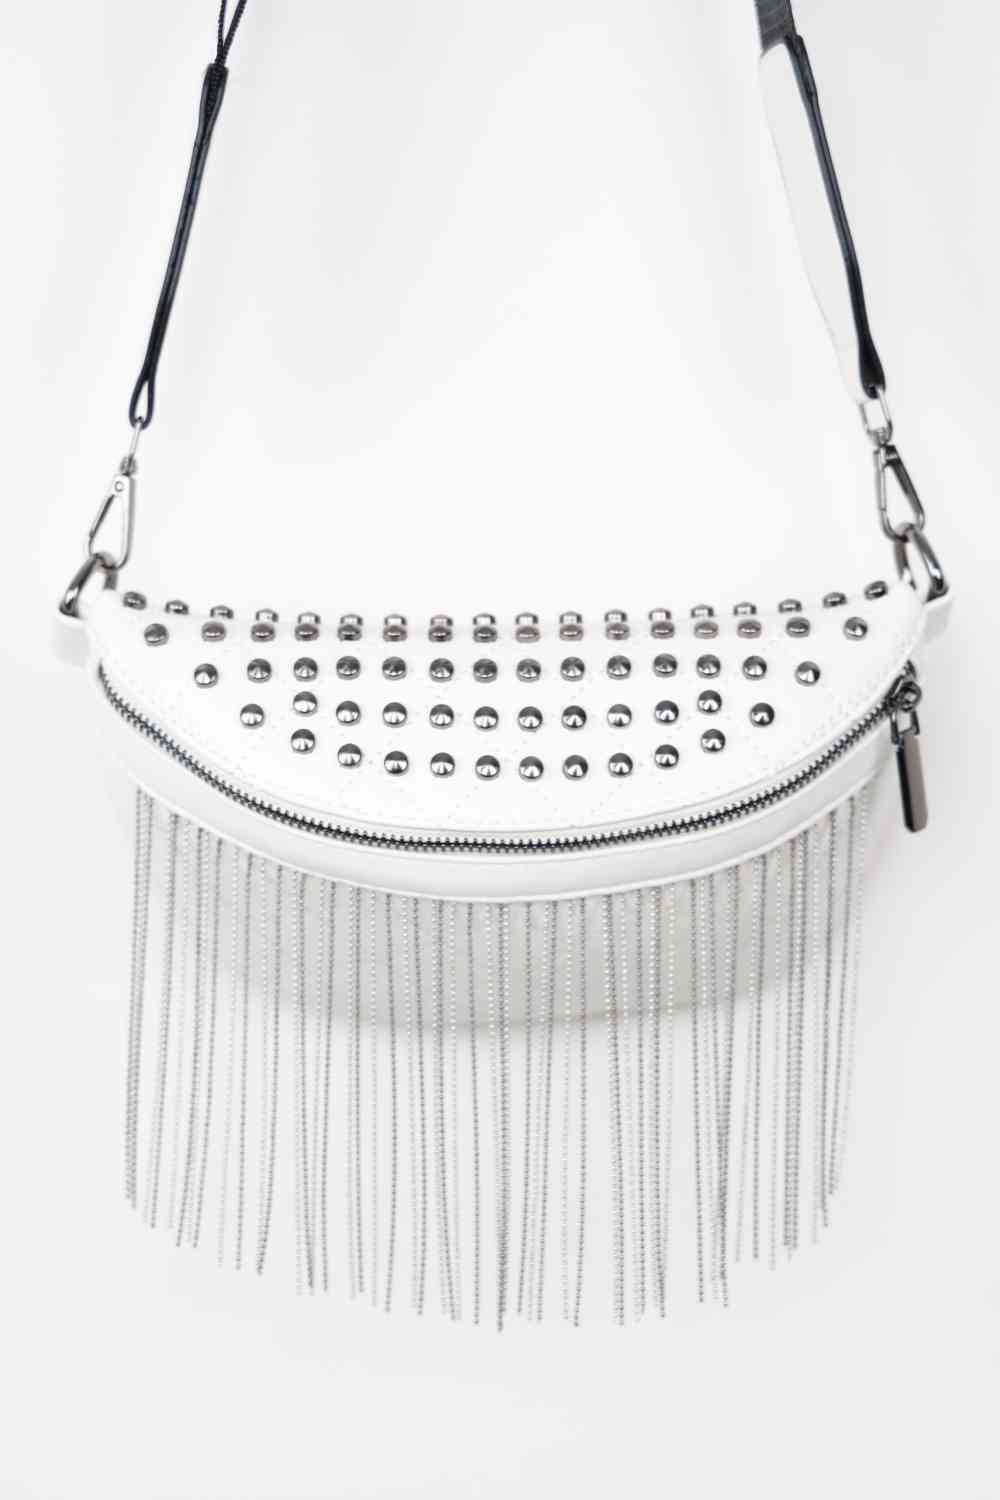 Adored PU Leather Studded Sling Bag with Fringes White One Size